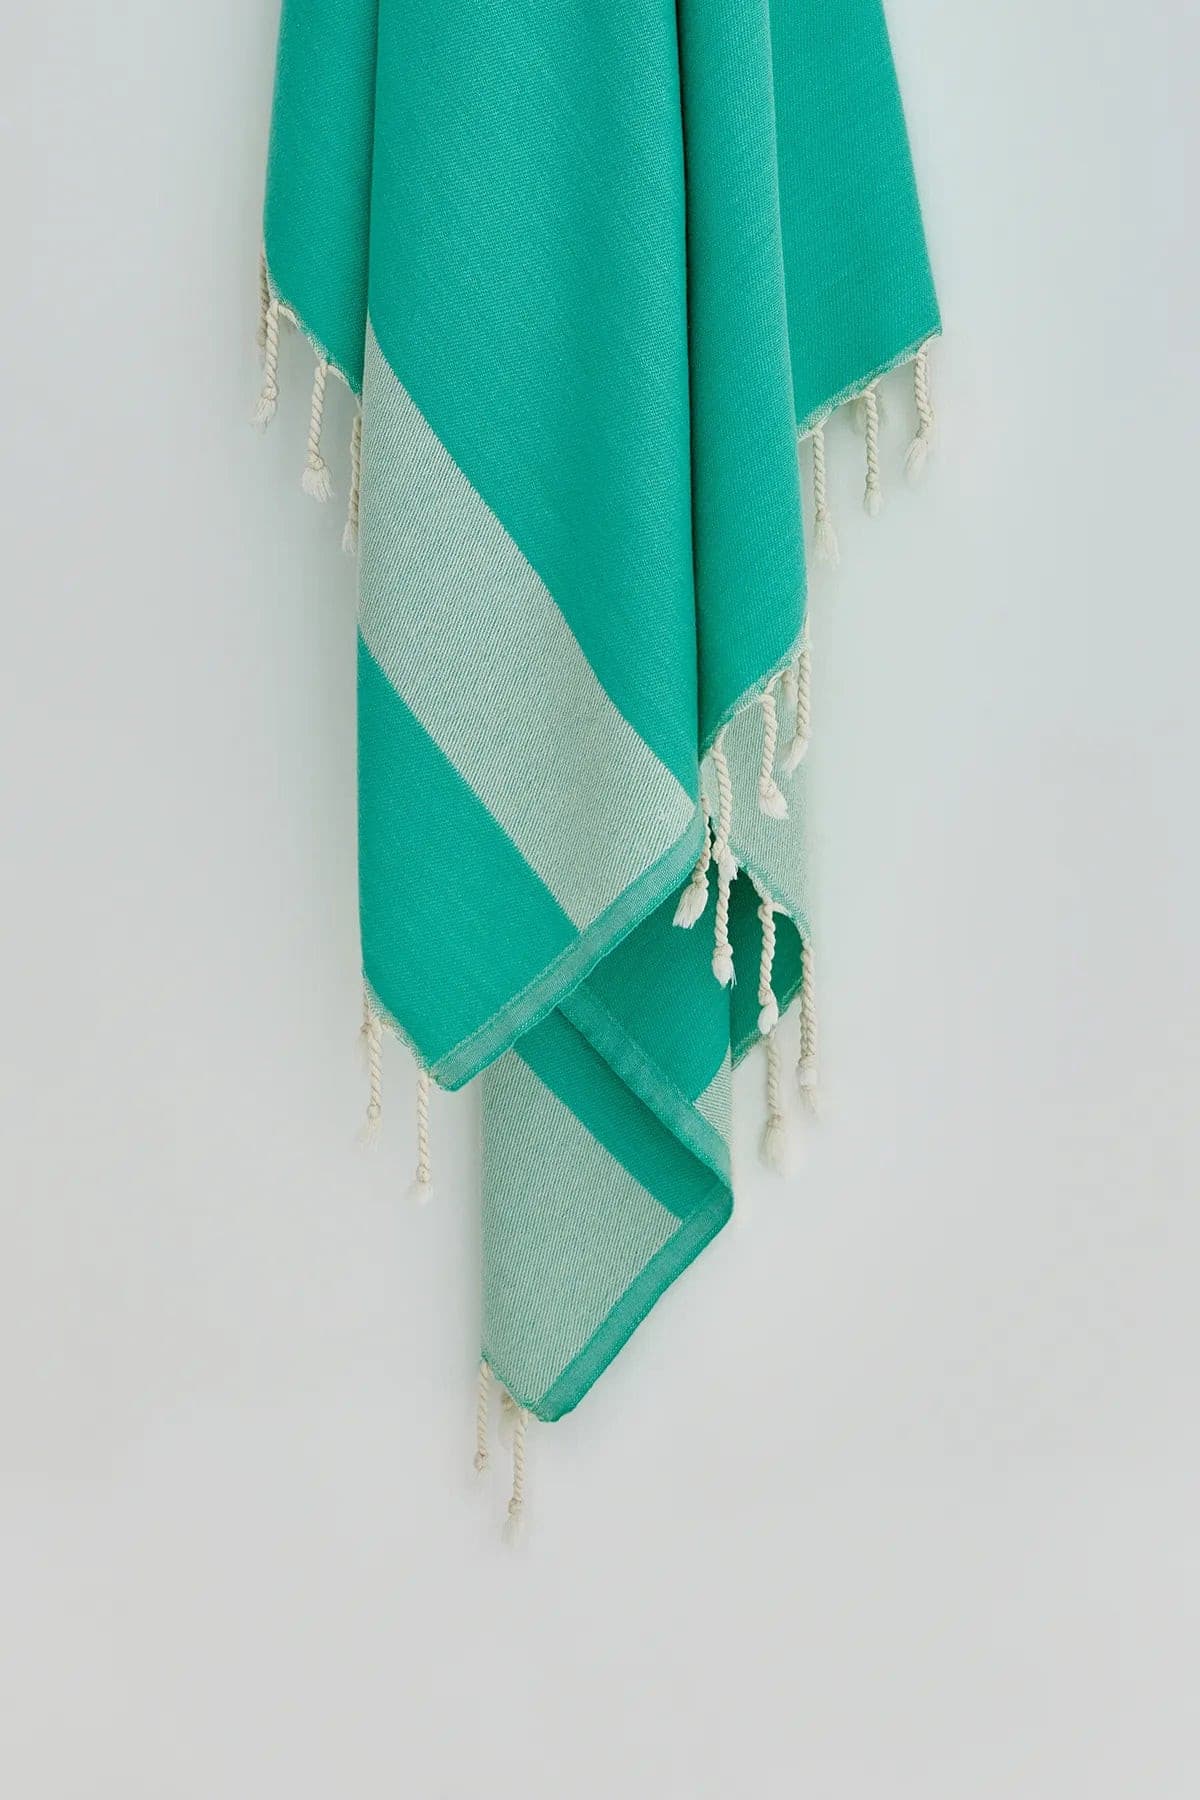 Beach/Bath,Crystal Green,Turkish towel,detailed,summer,line patterned,double-faces,purified sand,light,compact, easy pack,fun, recycled